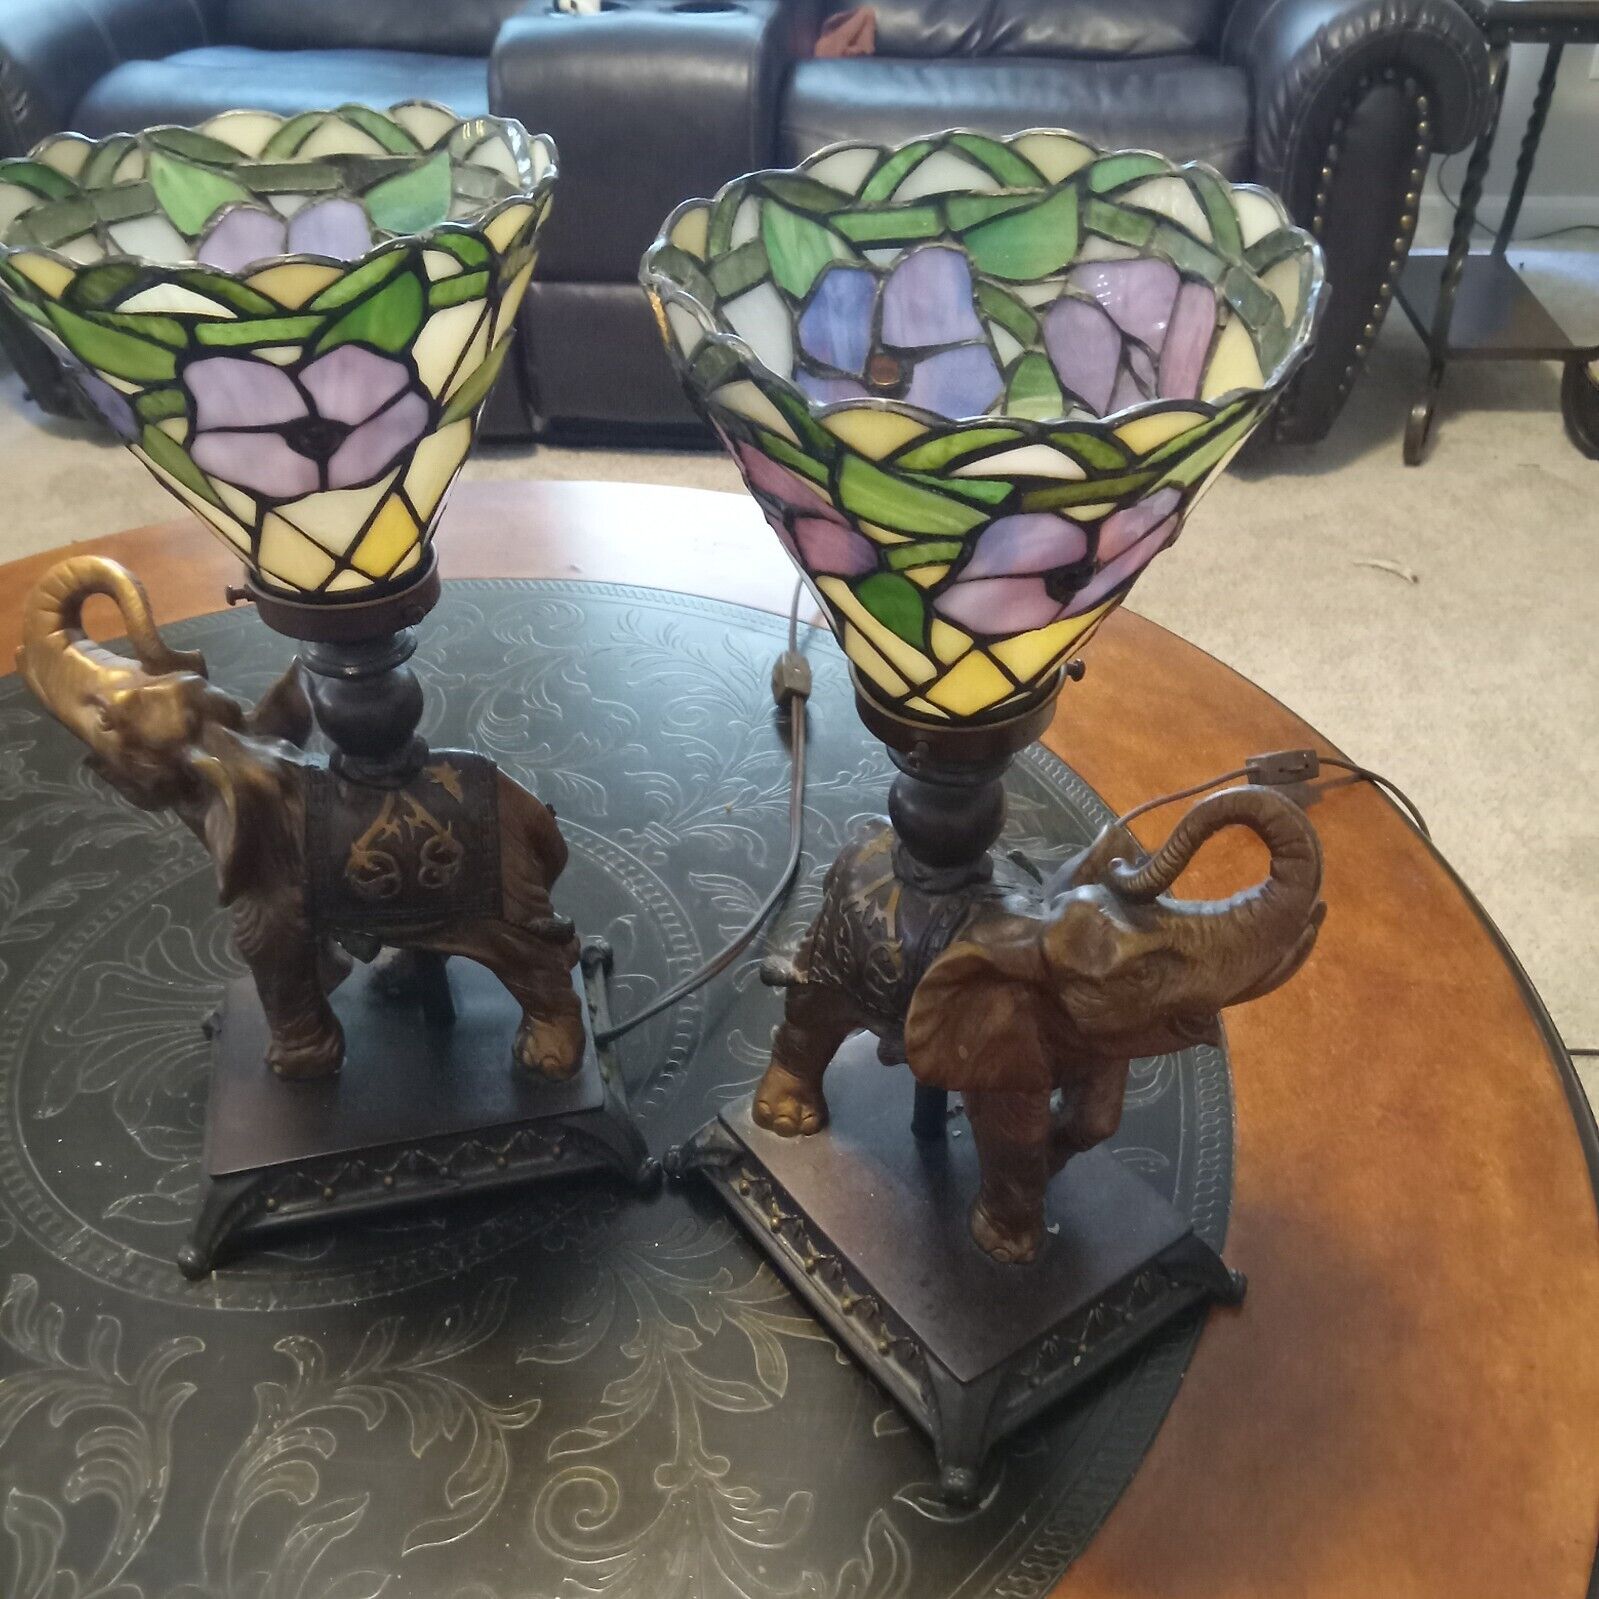 Vintage/Antique Elephant Lamp Base.  Purple and green stained glass lamp